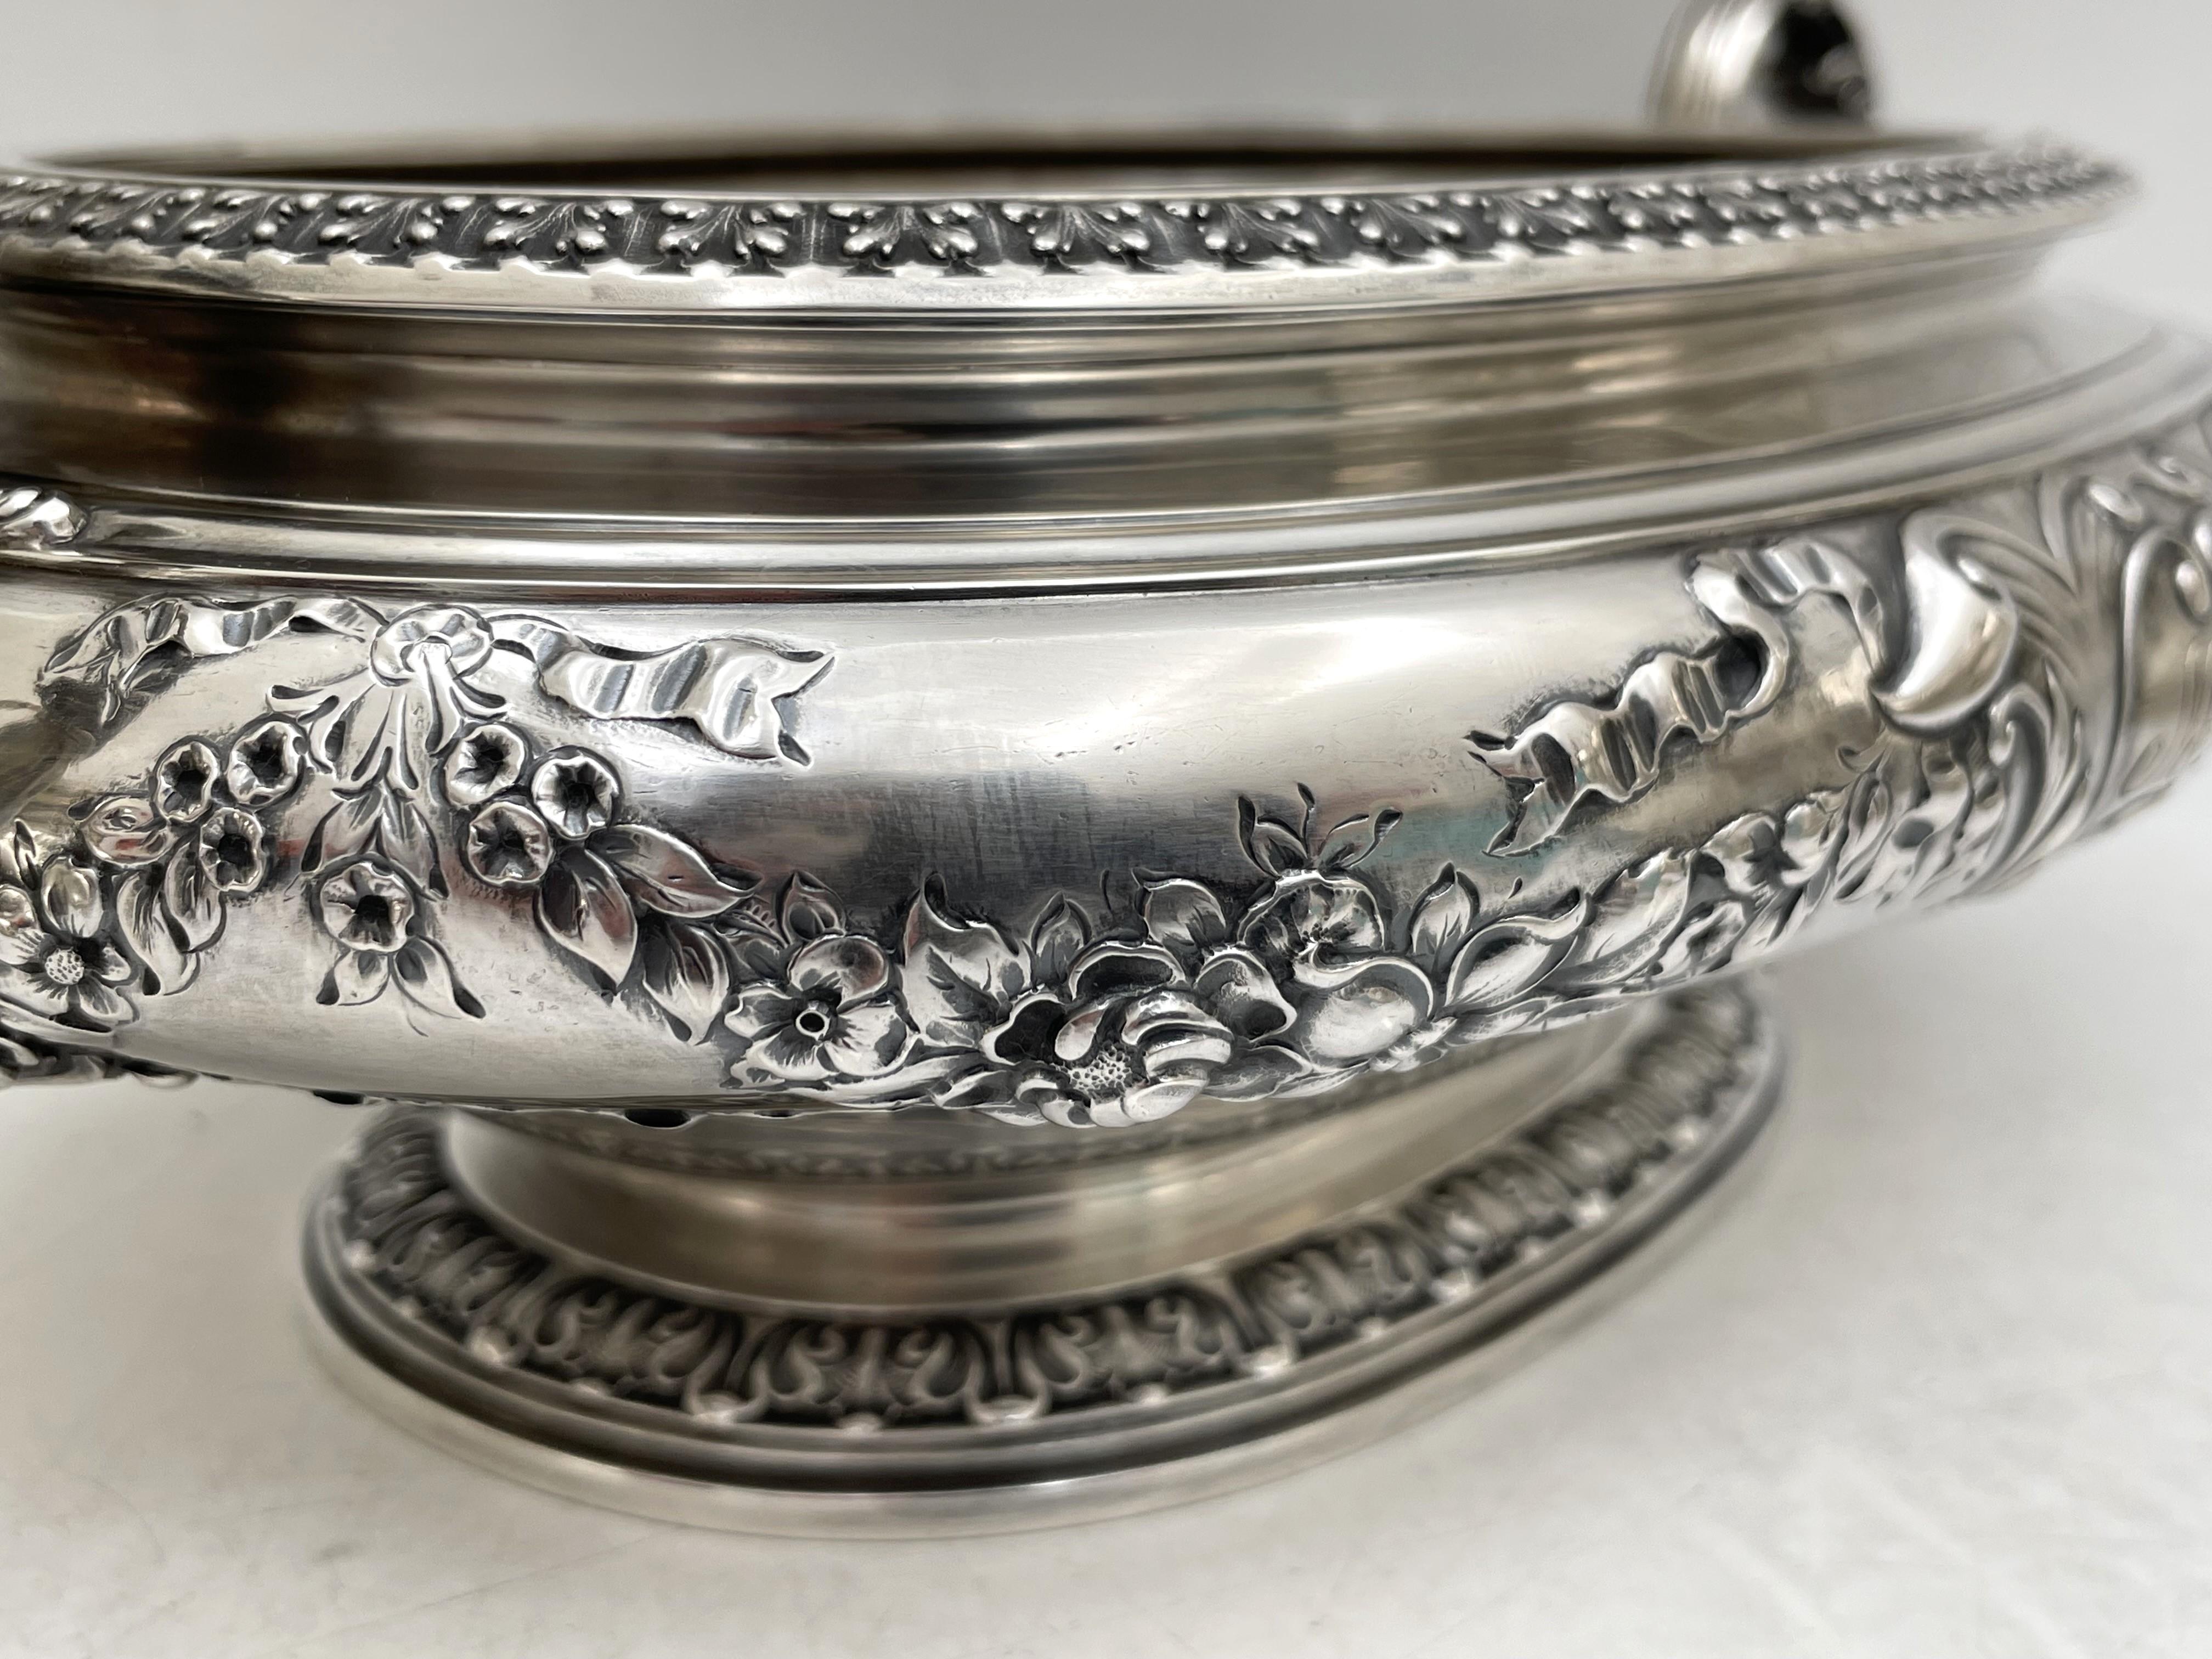 Gorham Sterling Silver 1898 Two-Handled Tureen/ Covered Bowl Art Nouveau Style For Sale 1